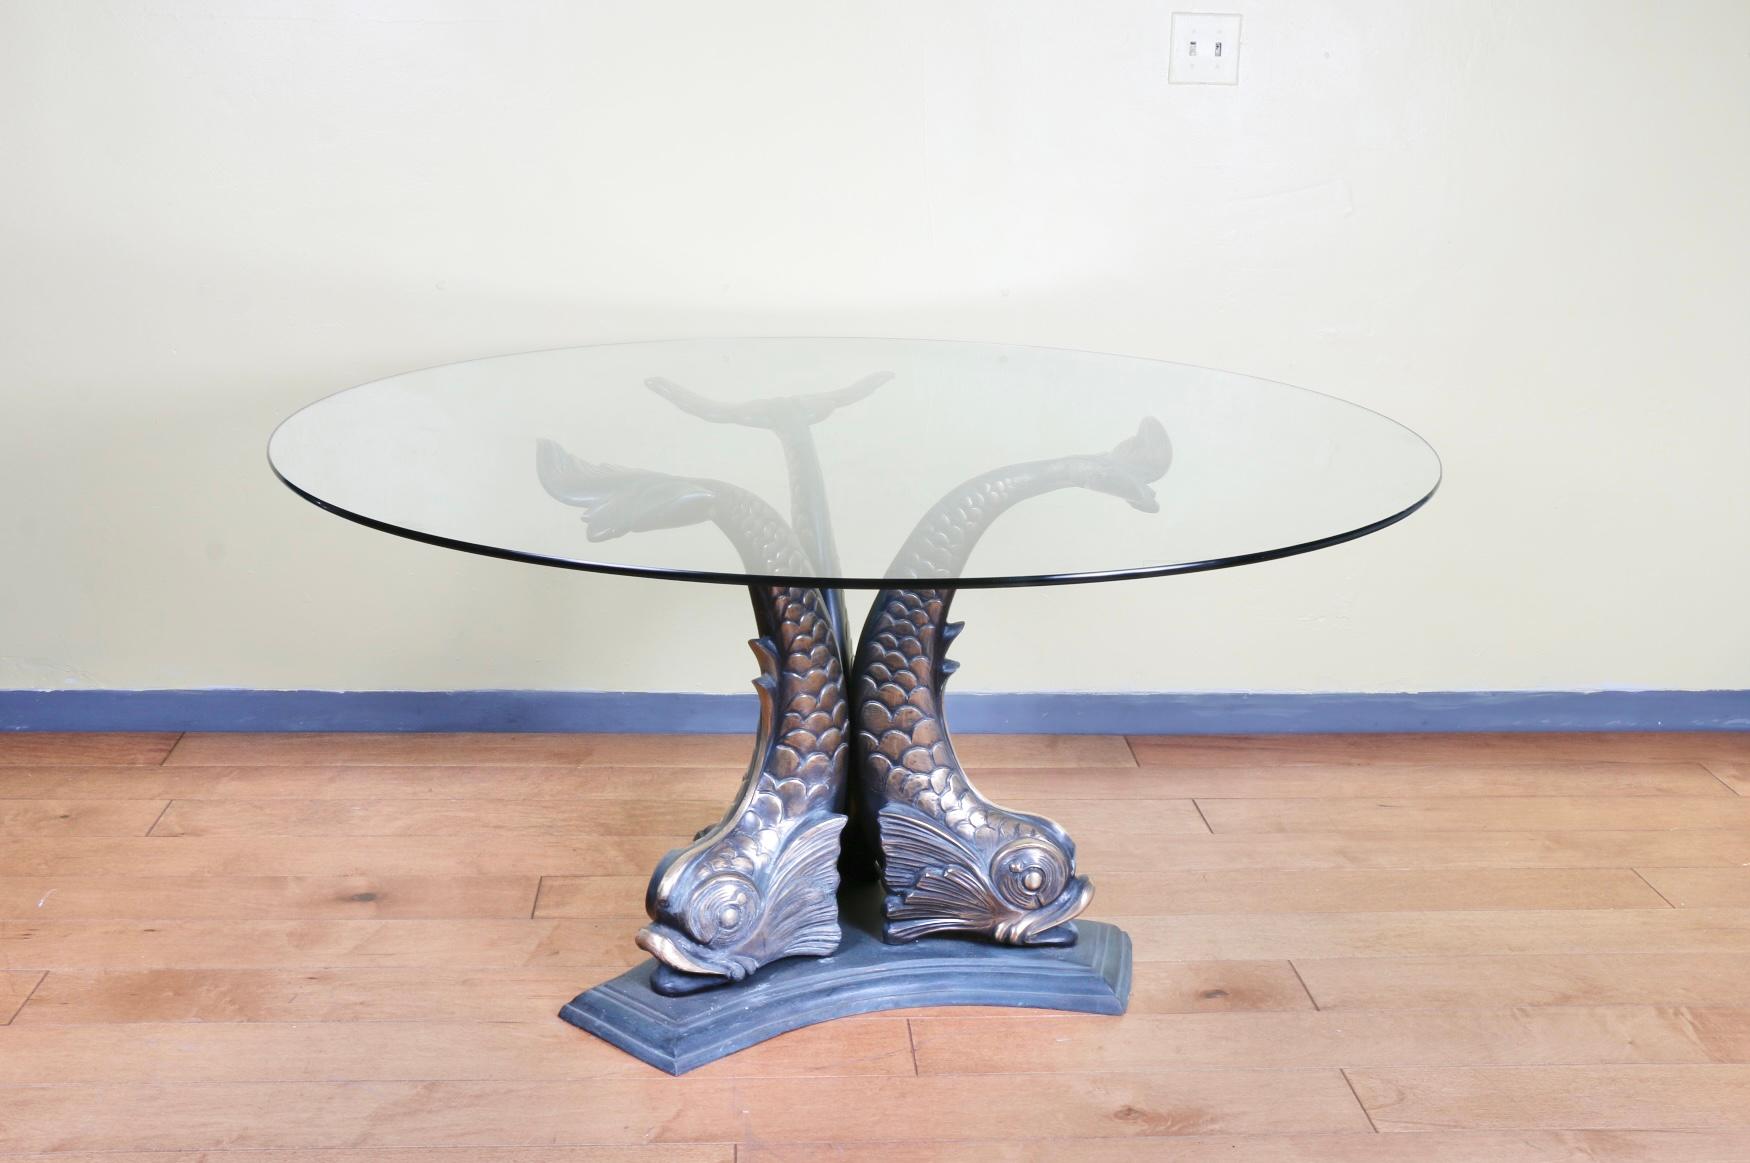 Gorgeous heavy and solid bronze koi fish center table base with round glass top. Very elegant and great for any home entrance. No damages or broken parts.